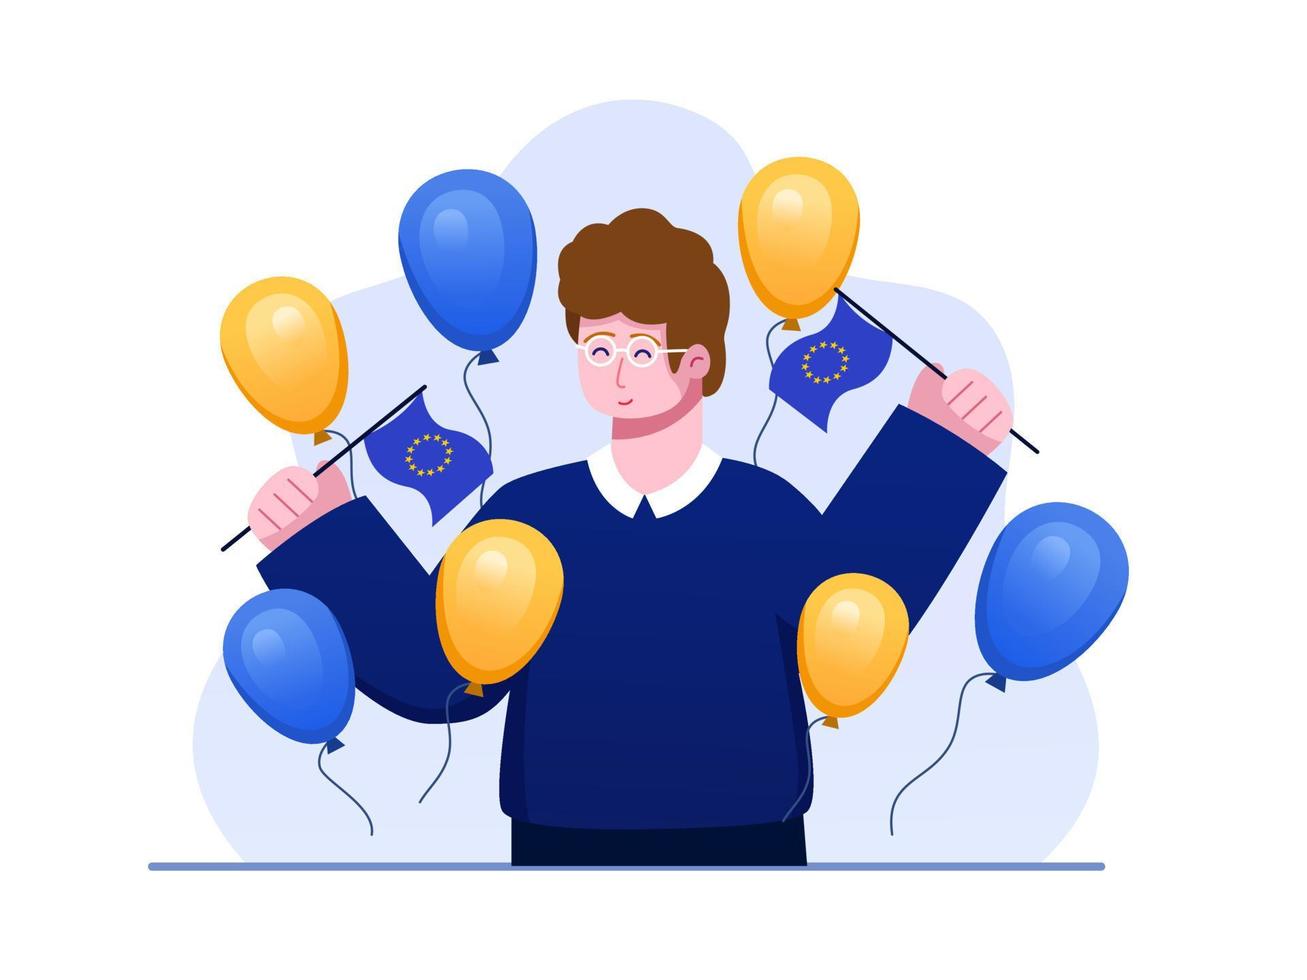 People Celebrate Europe Day with Holding Europe Flag, balloon and confetti with European flag color. Can be used for greeting card, postcard, banner, poster, social media, web, etc. vector